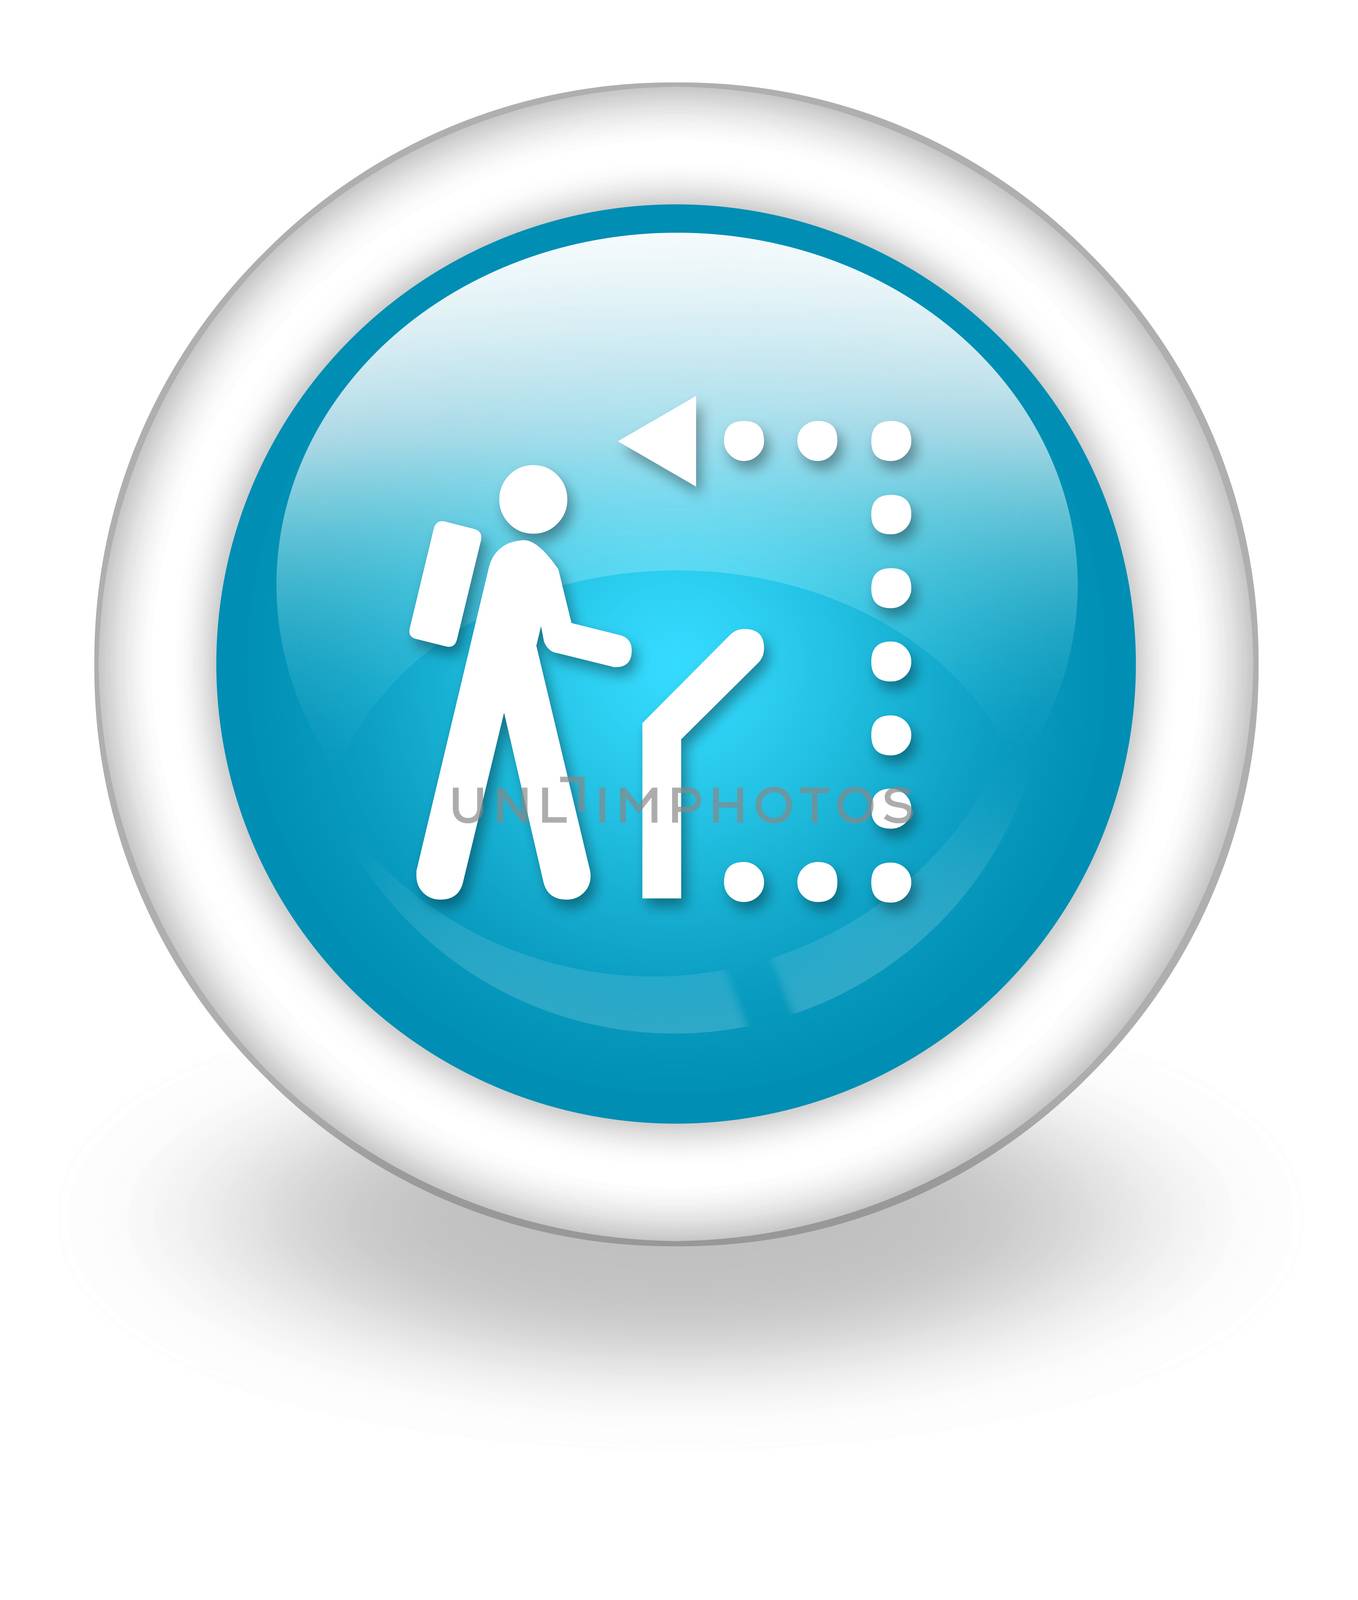 Icon, Button, Pictogram with Self-Guiding Trail symbol